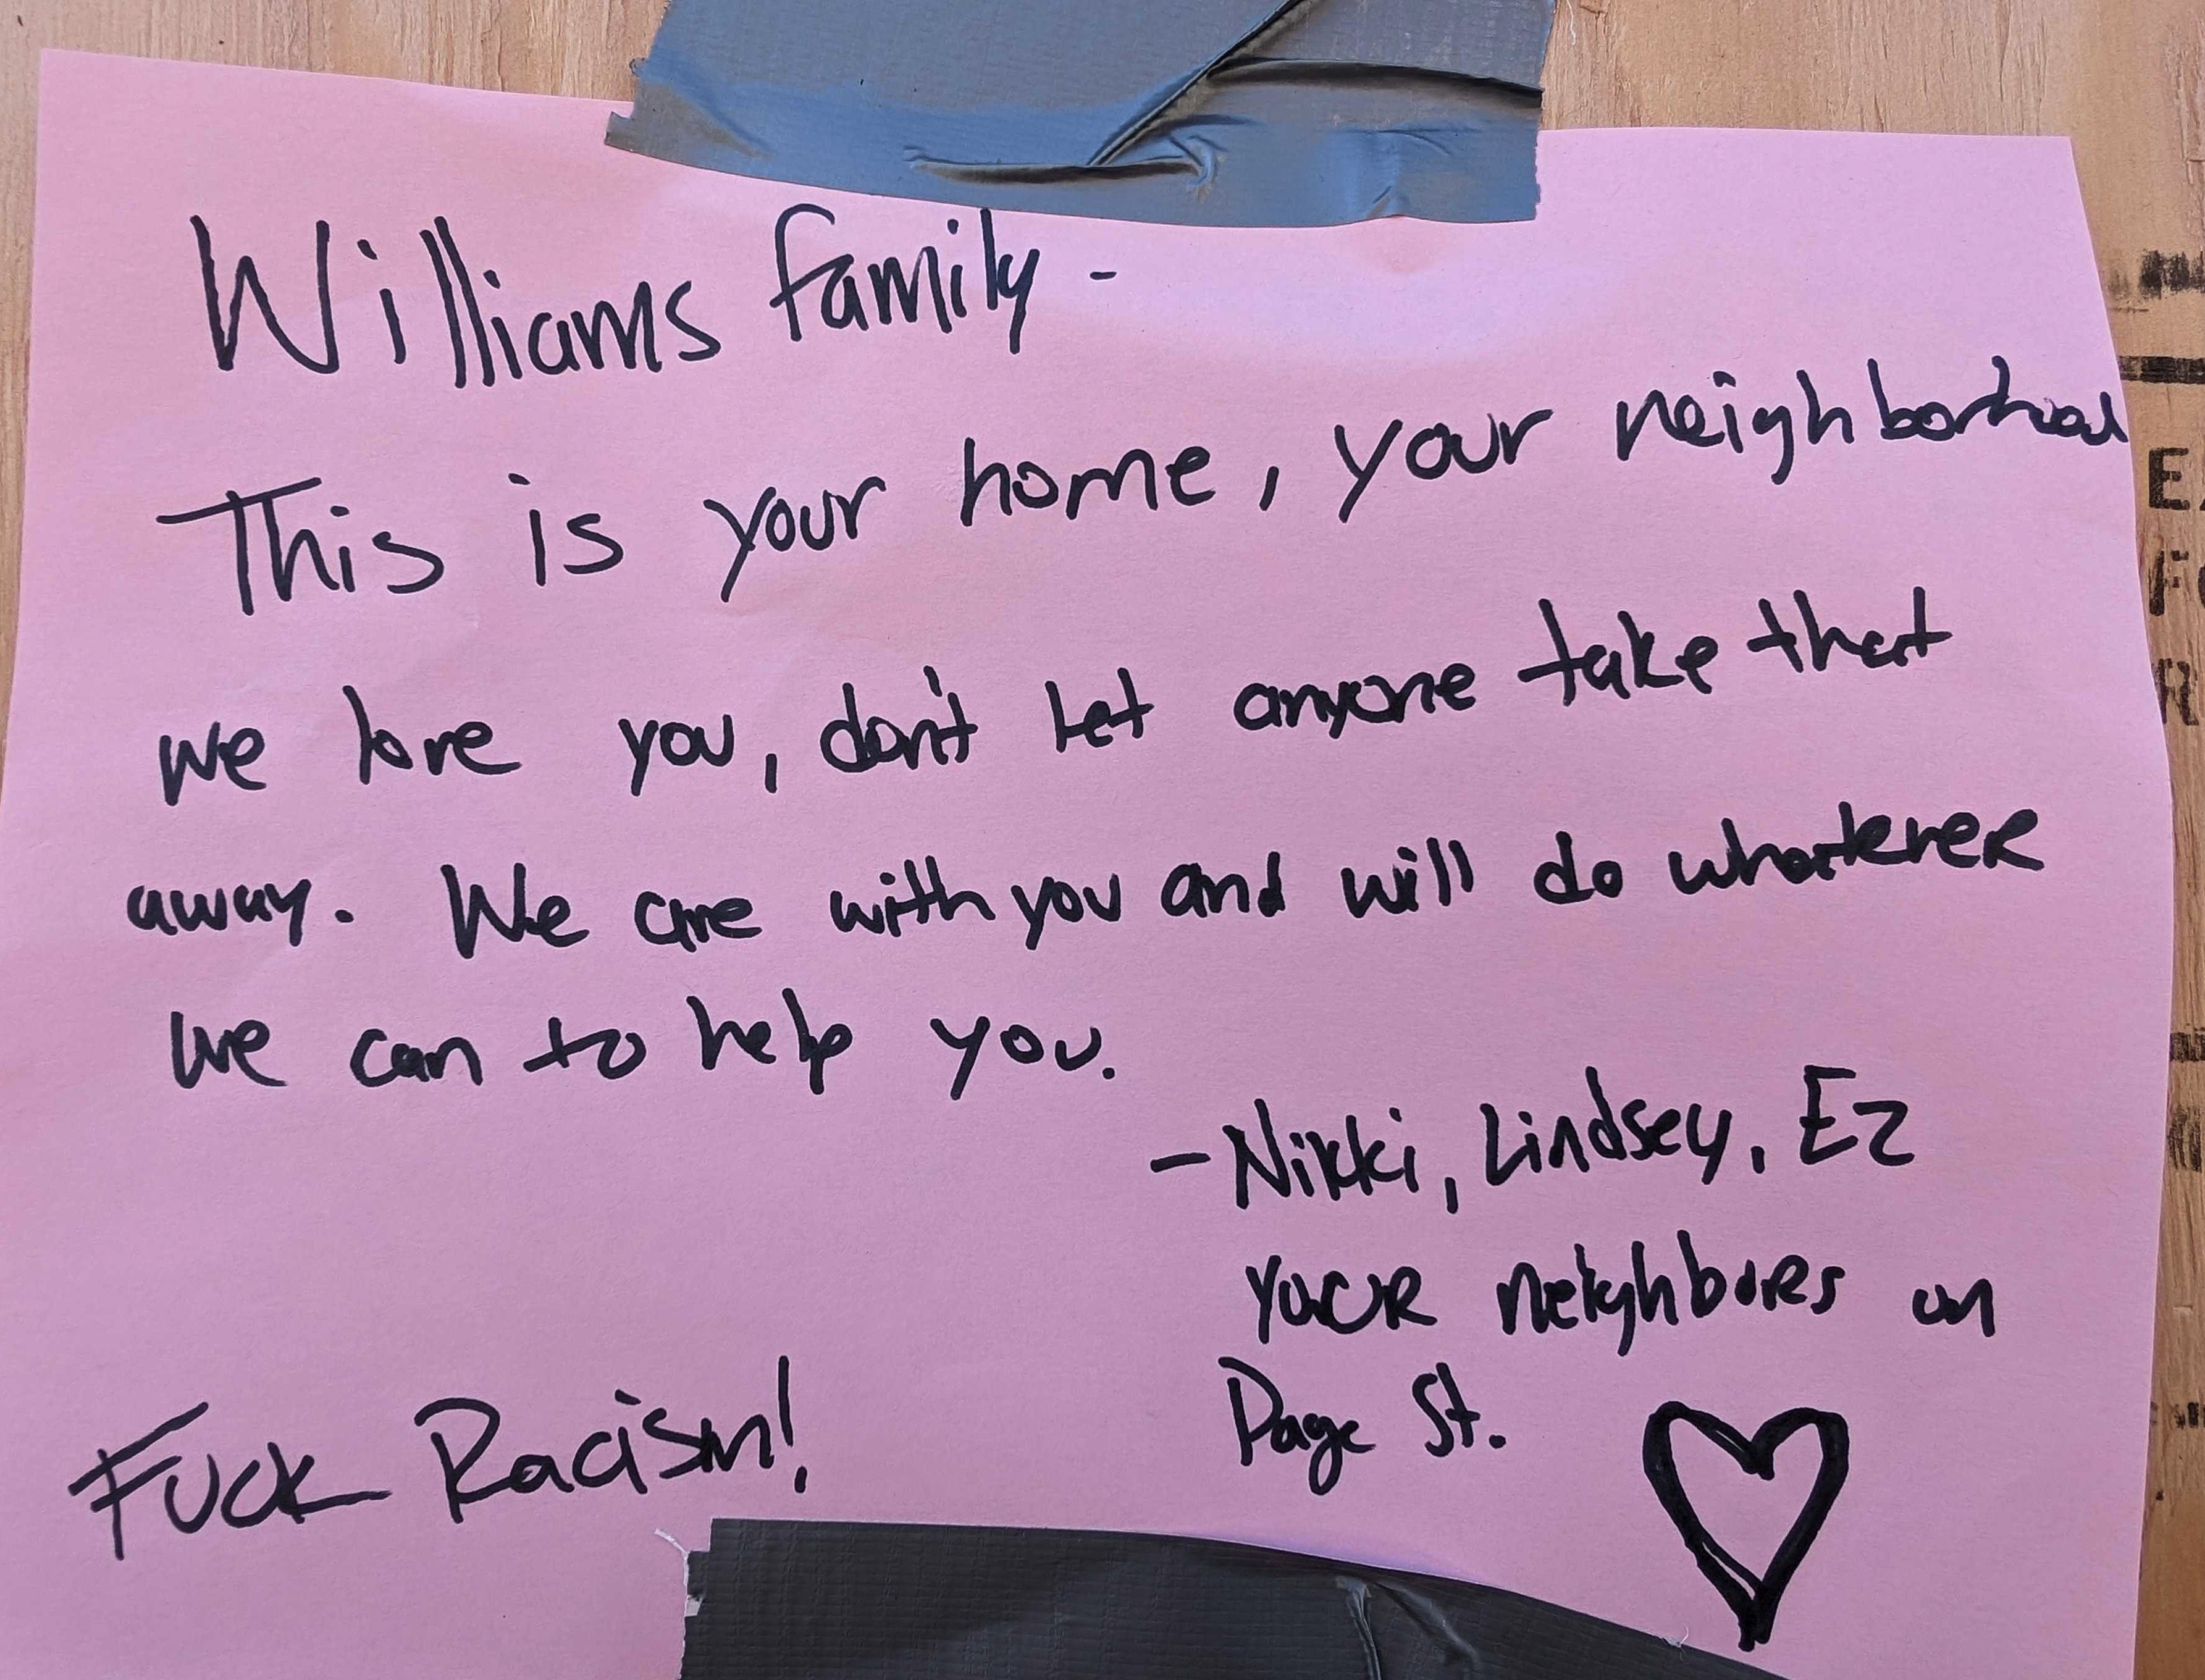 A handwritten note on pink paper taped to a surface expresses support for the Williams family, denounces racism, and is signed by neighbors Nikki, Lindsey, and Ez.